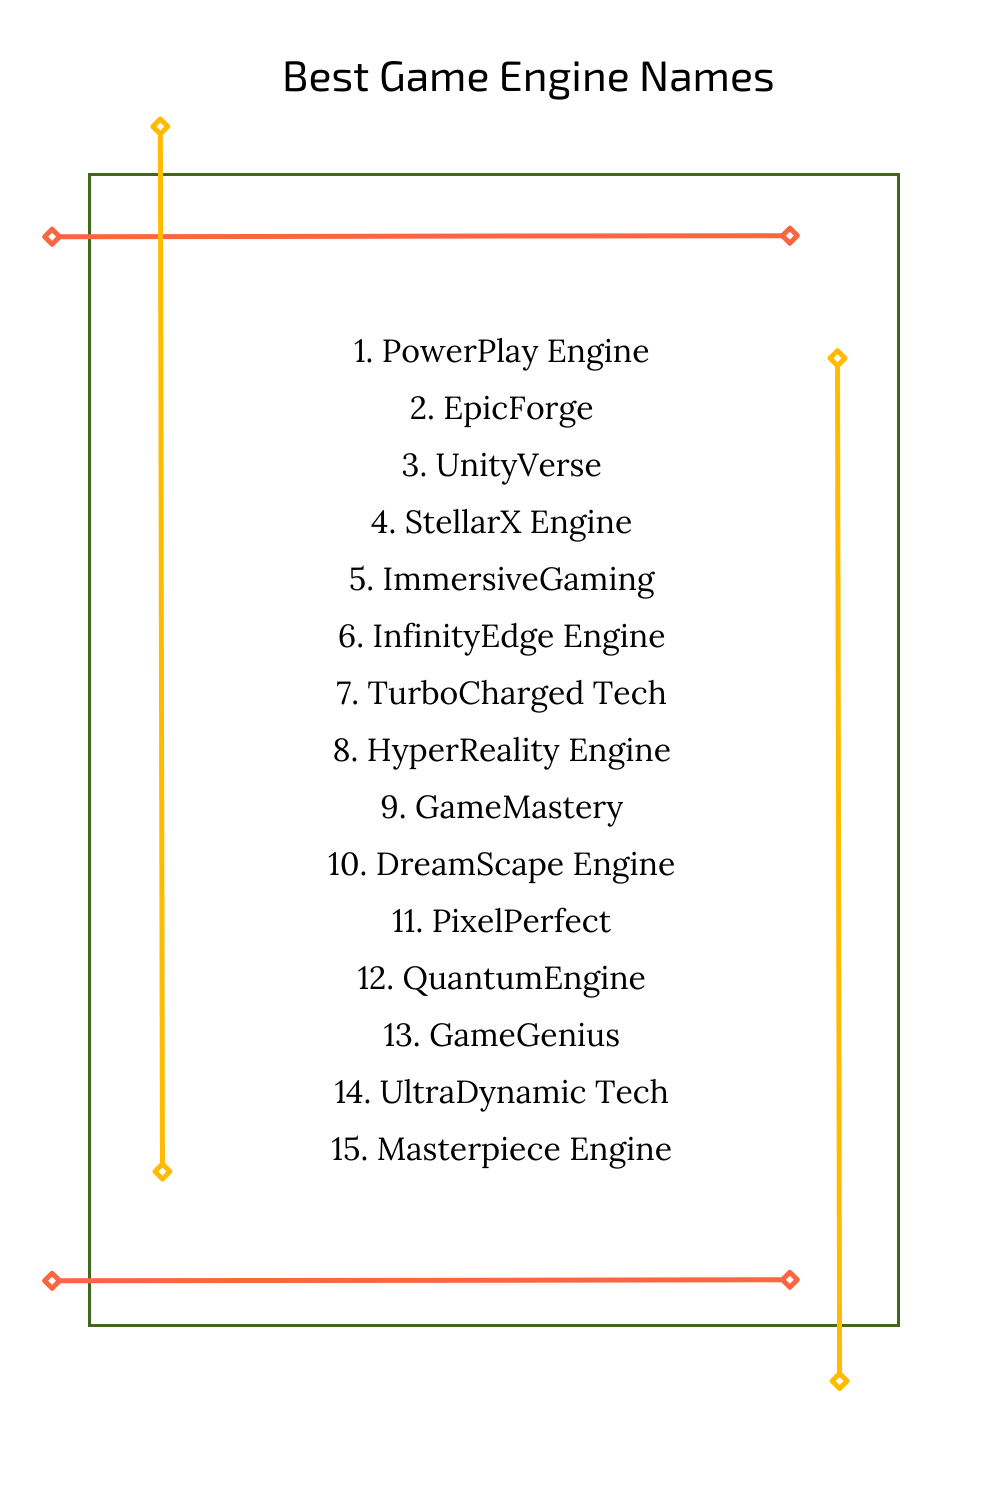 Best Game Engine Names